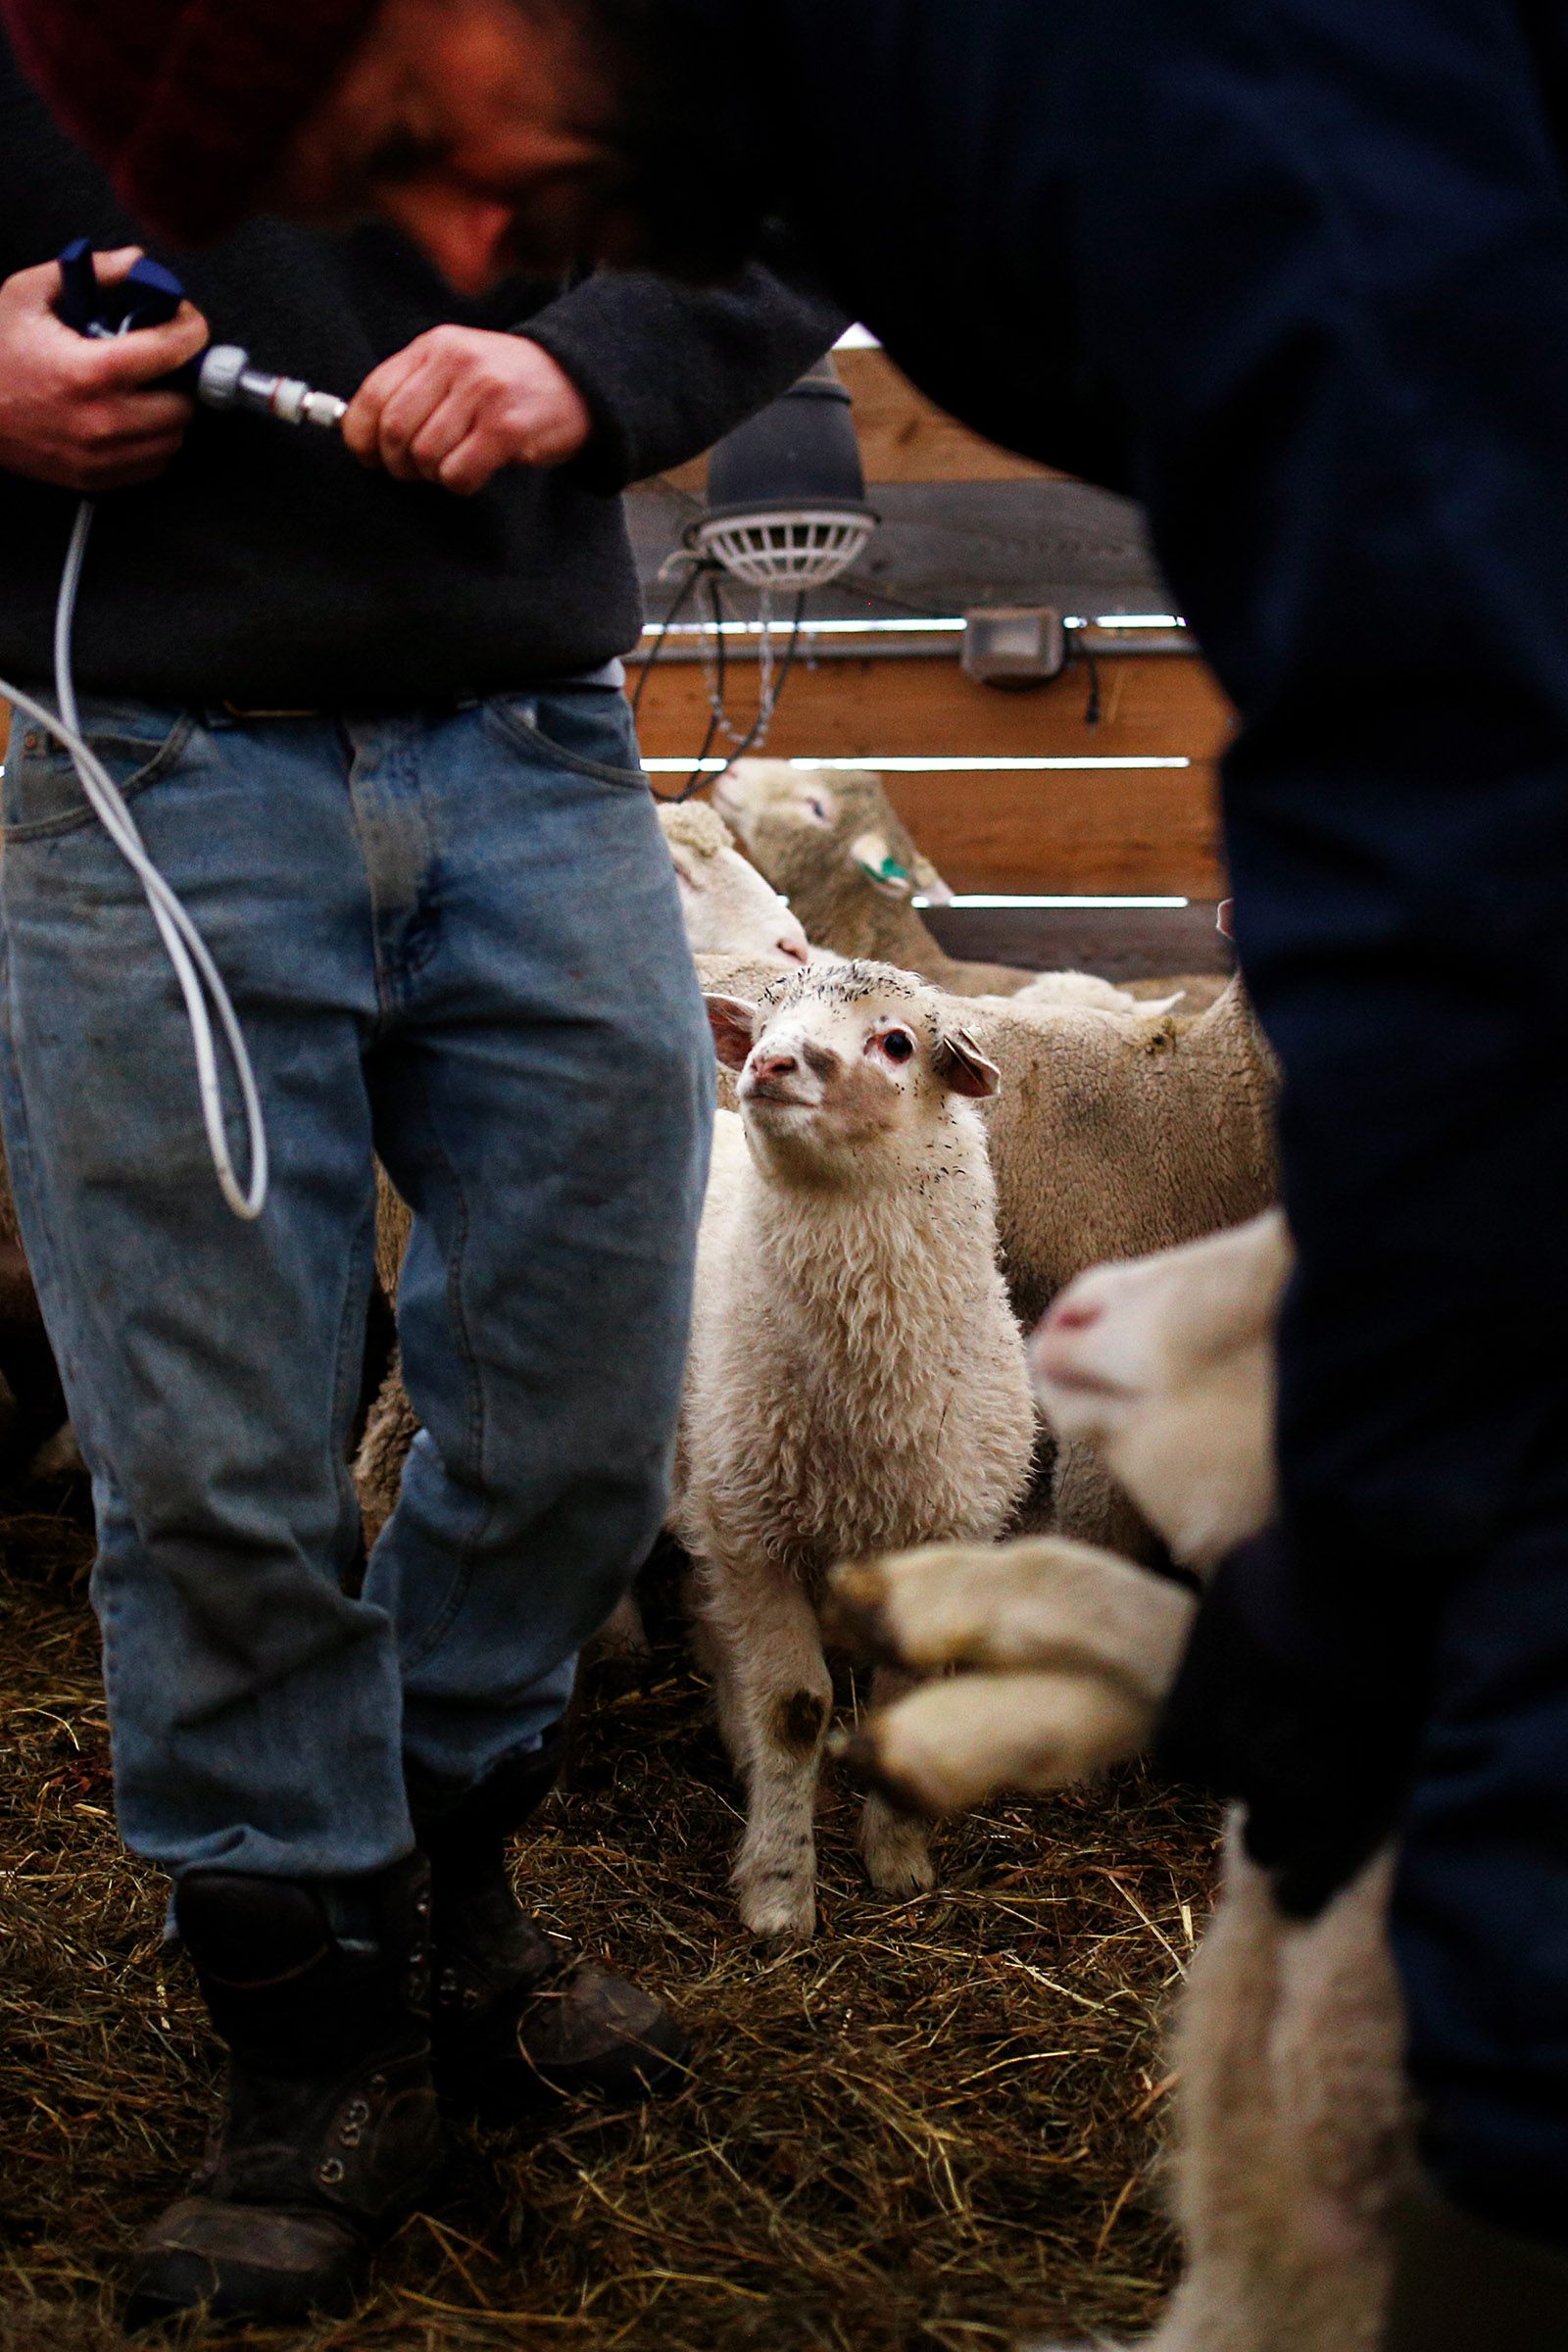 A lamb watches as animal manager Chris Bonasia, left, and owner Chuck Wooster vaccinate lambs against tetanus and other bacterial infections at Sunrise Farm in White River Junction, Vt., on Monday, April 8, 2019. Out of over 100 lambs on the farm, 40 of them will be slaughtered each year. (Valley News - Joseph Ressler) Copyright Valley News. May not be reprinted or used online without permission. Send requests to permission@vnews.com.